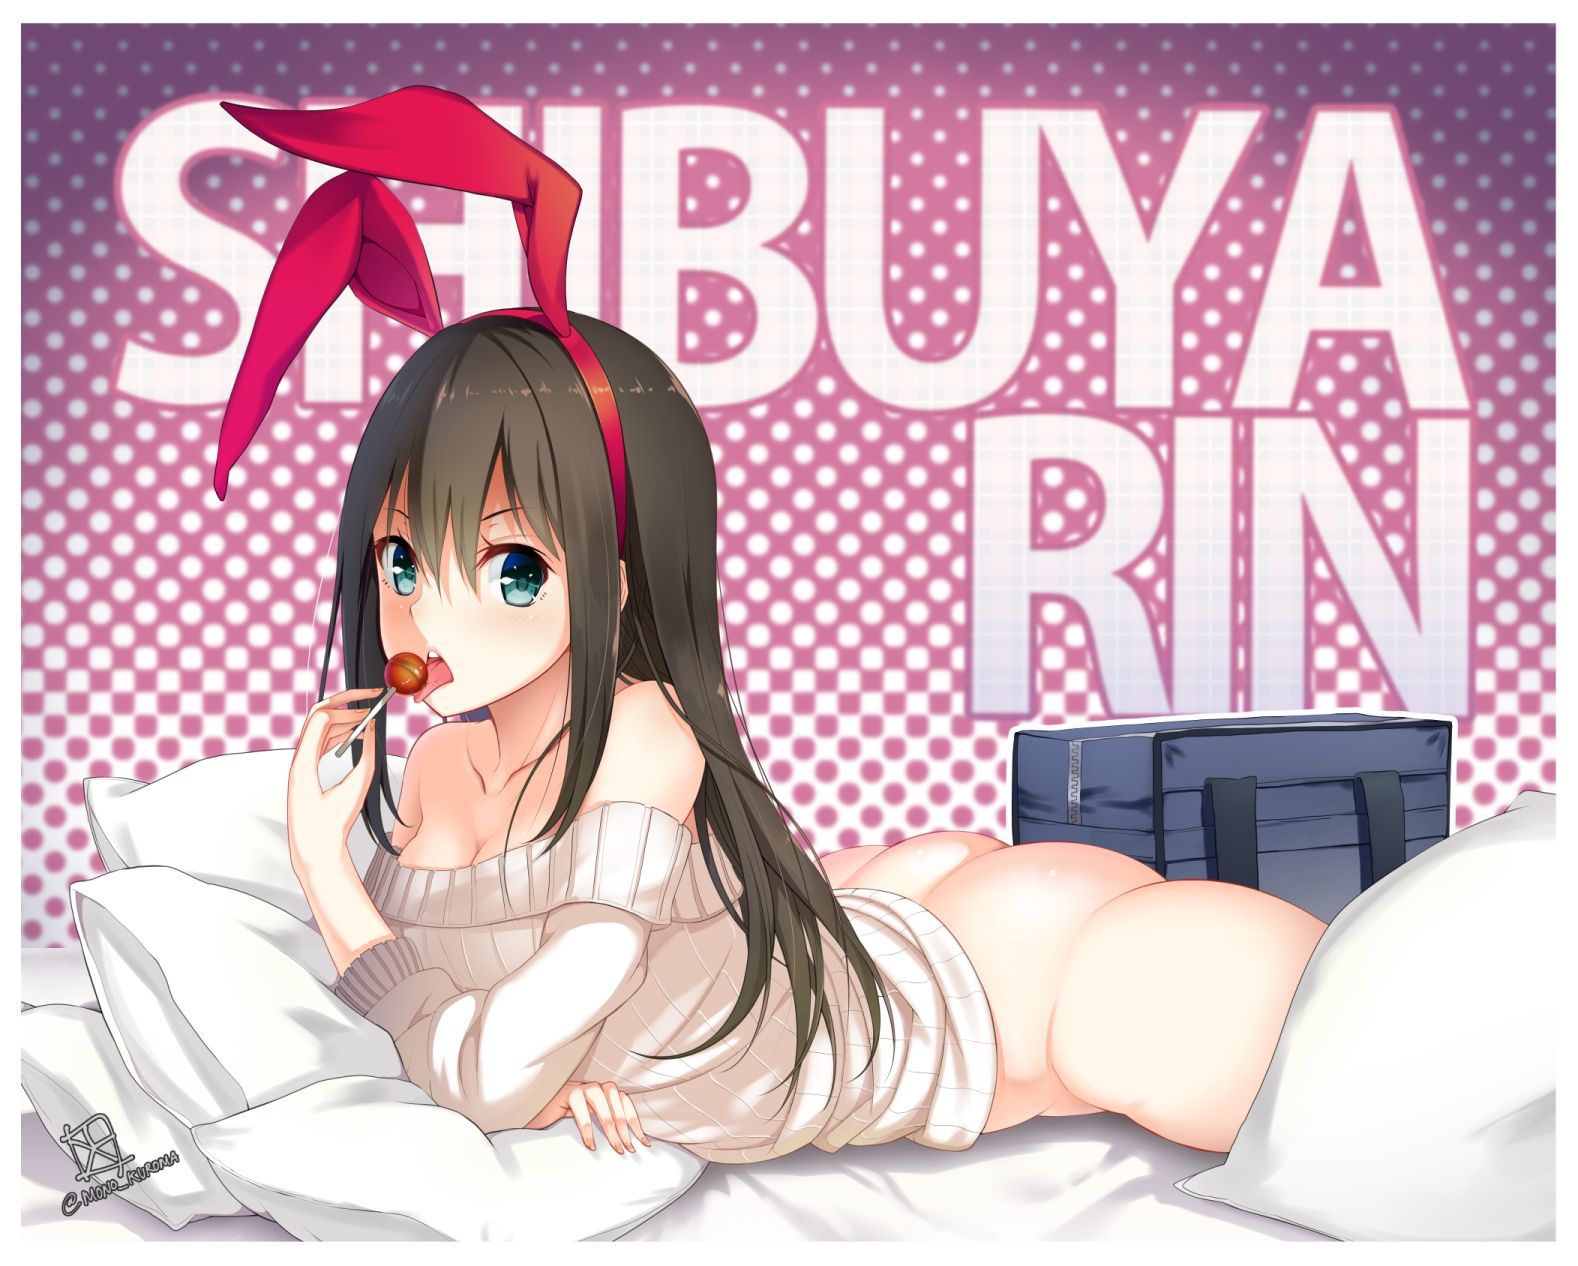 [Secondary ZIP] cool and sometimes roughing de mas Shibuya Rin-chan's image roundup 100 pieces 76